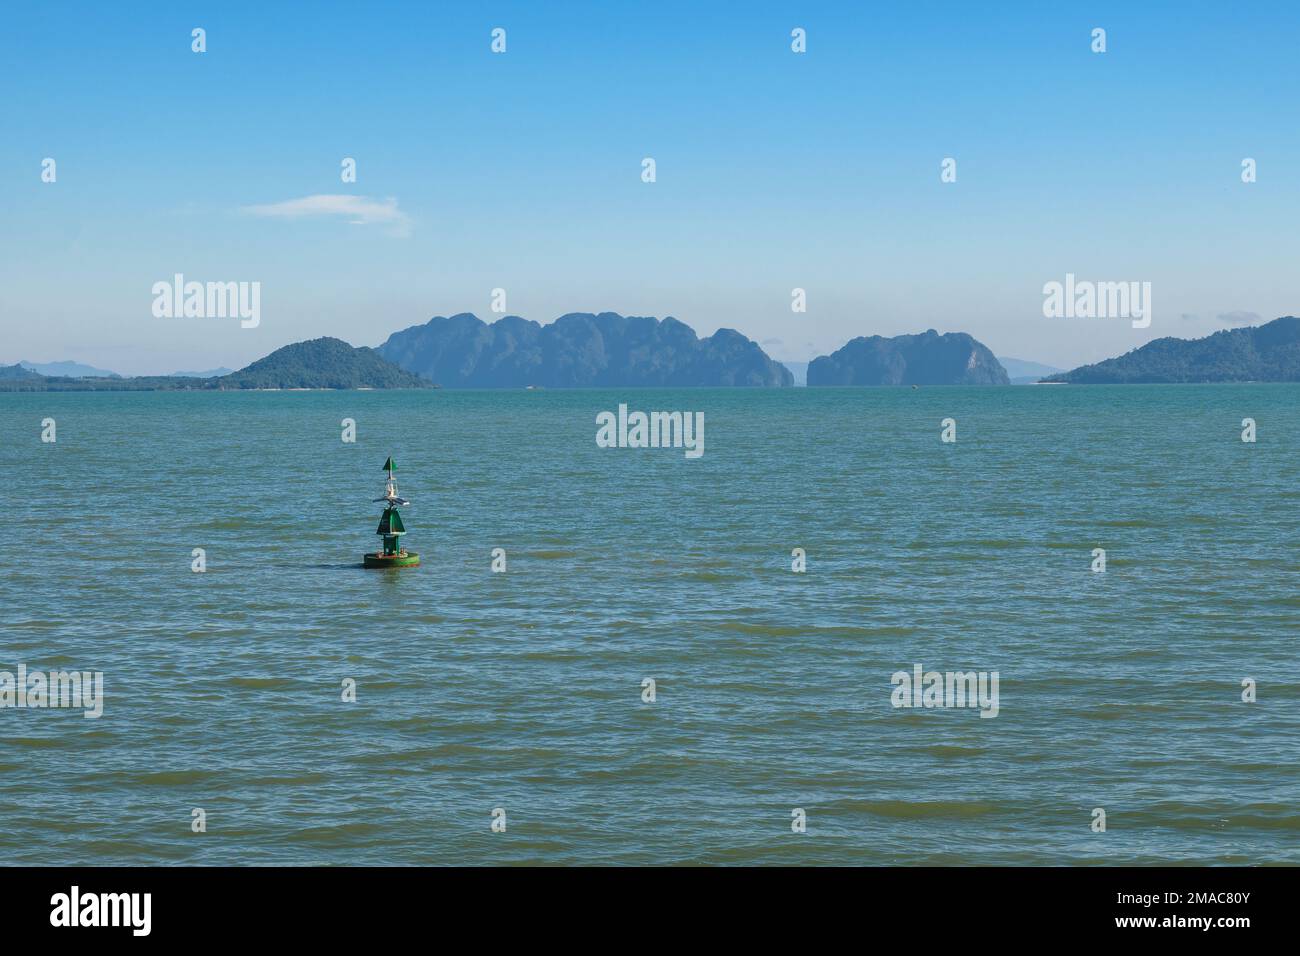 Tropical sea view, landscape from Ko Lanta, Southern Thailand. With green buoy in the foreground. Stock Photo